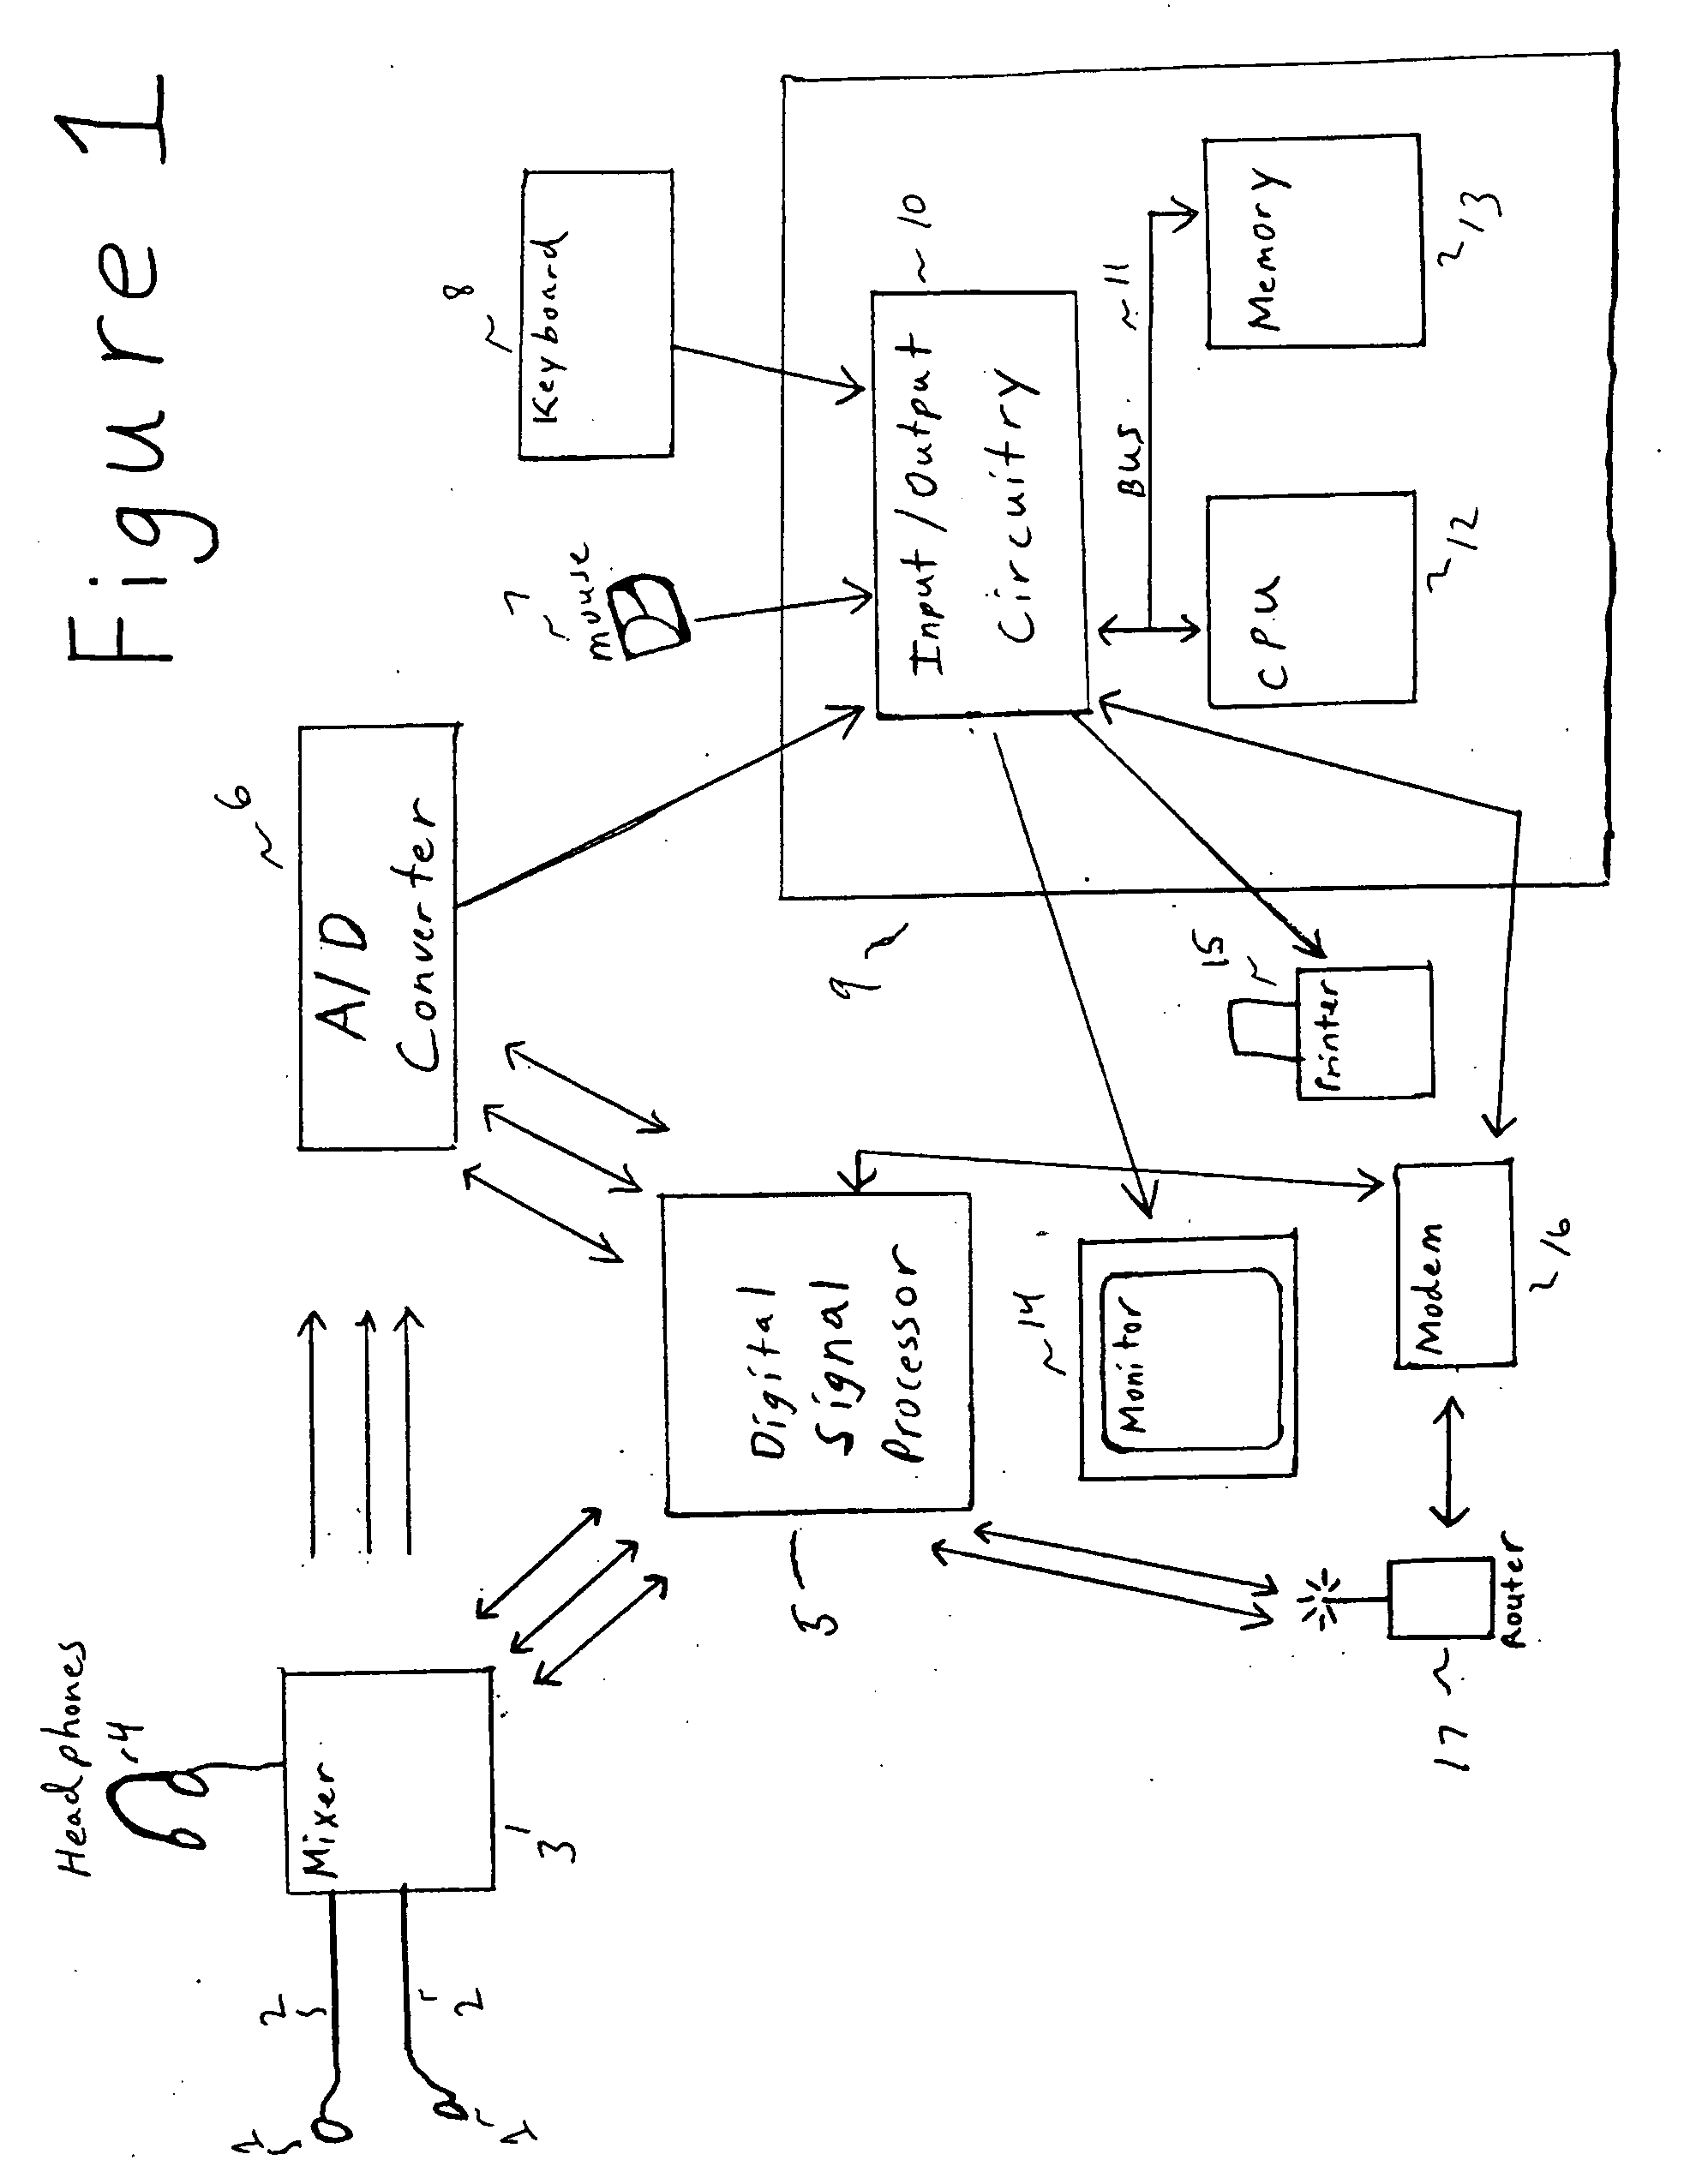 System and method for acquisition and analysis of physiological auditory signals